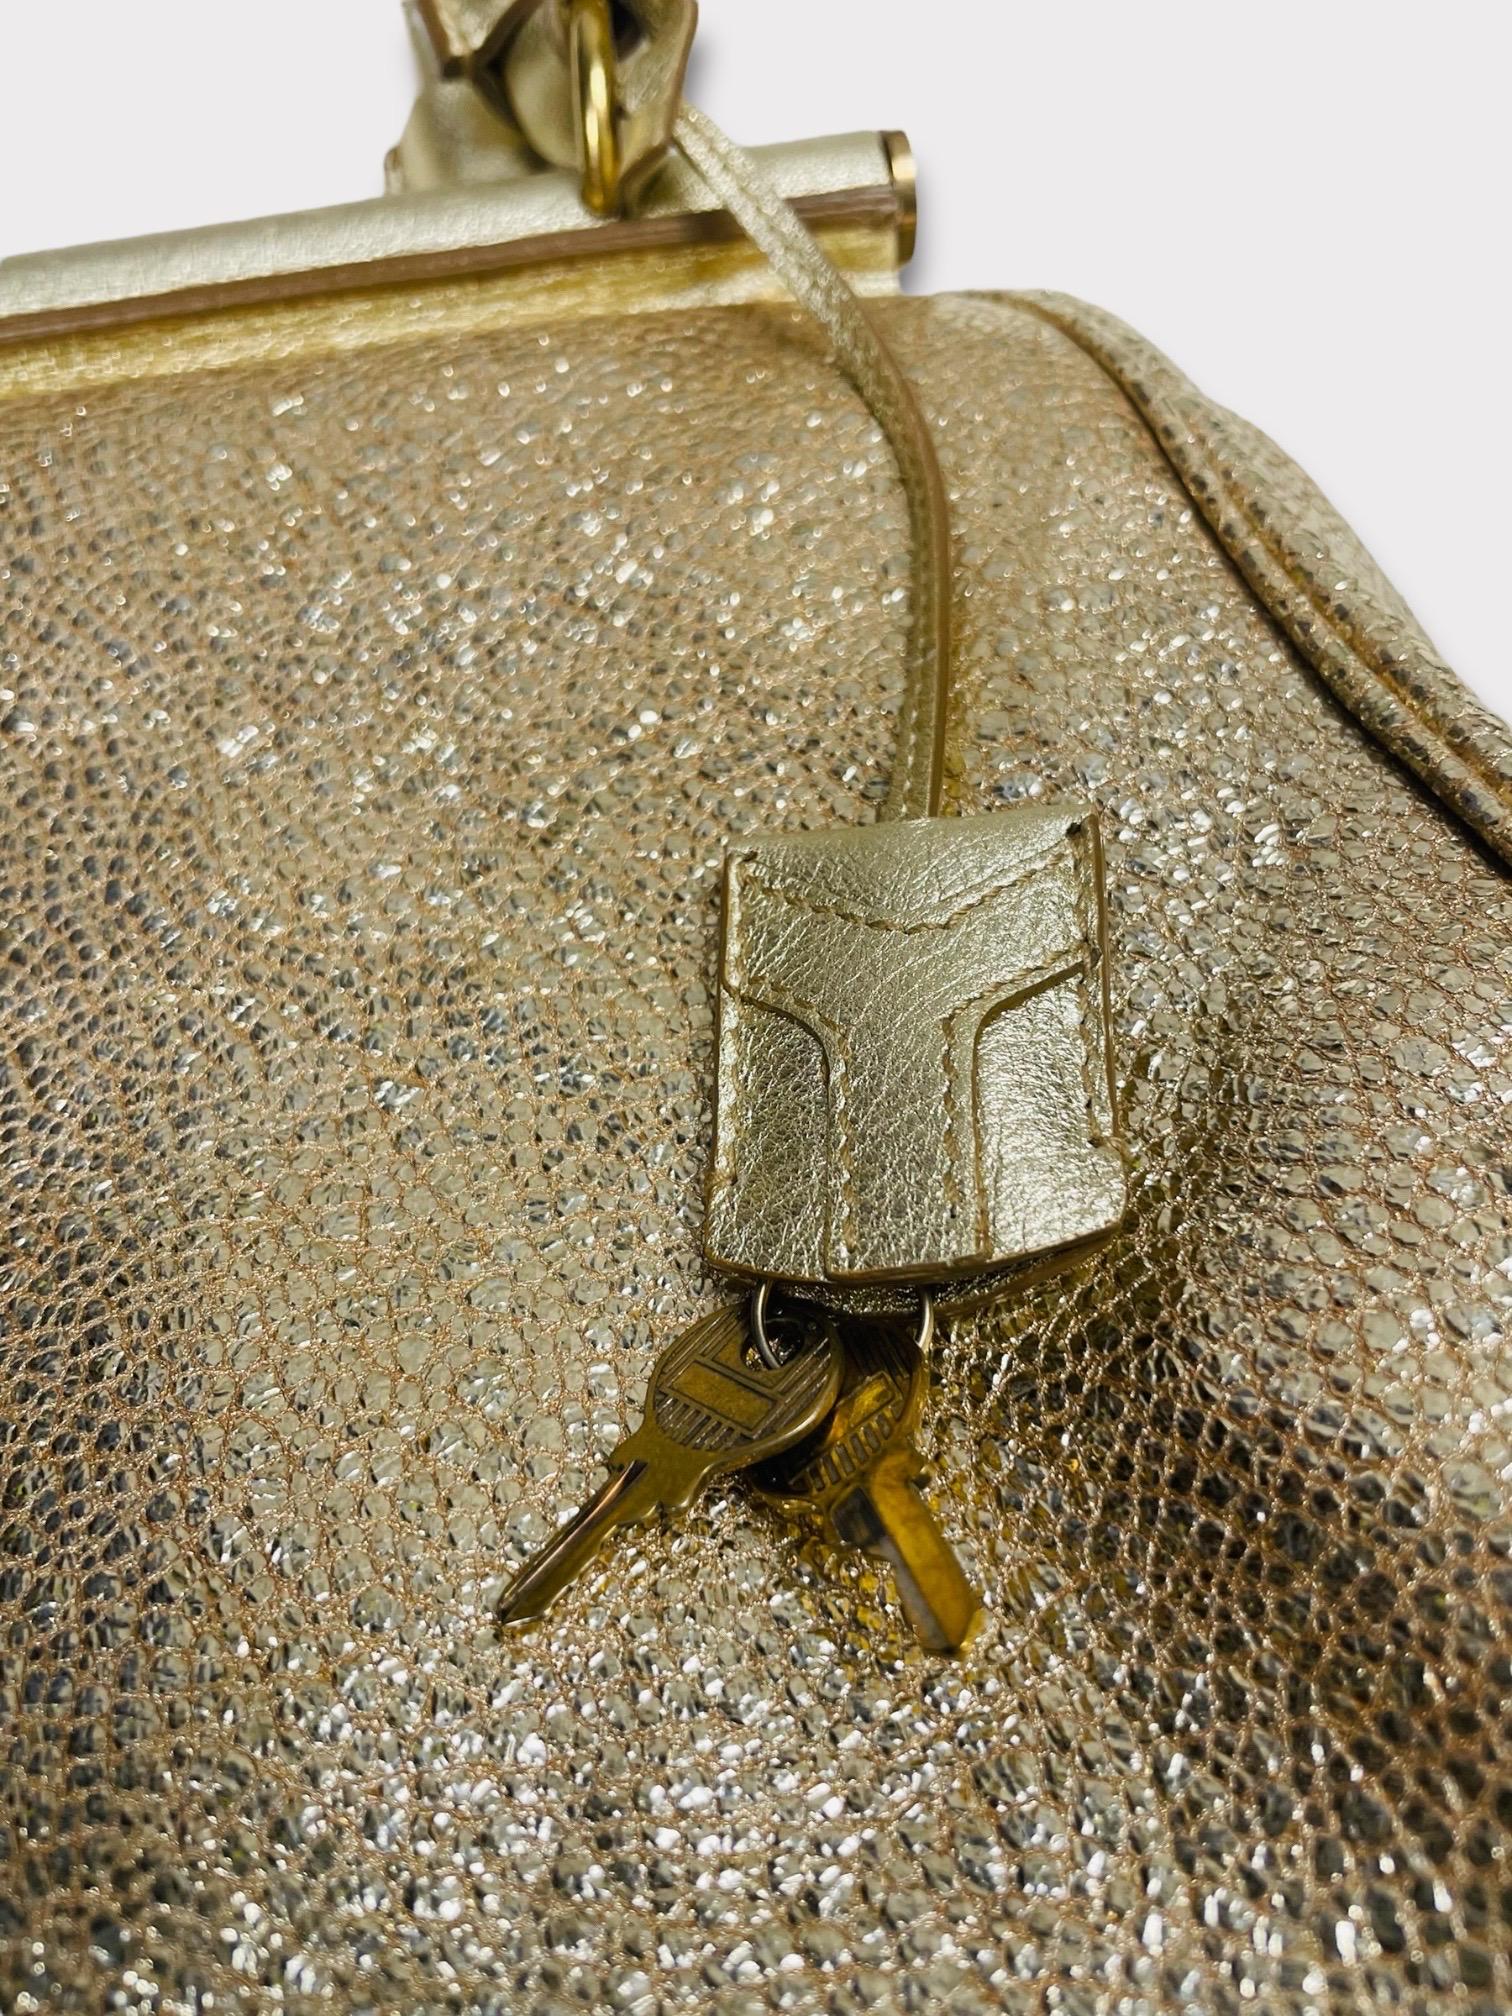 This Yves Saint Laurent Majorelle Bag will add a glamorous touch to your look. It comes in a metallic gold leather exterior accented with gold-toned hardware. This bag features rolled leather handles and feet at the base. The top zip closure opens